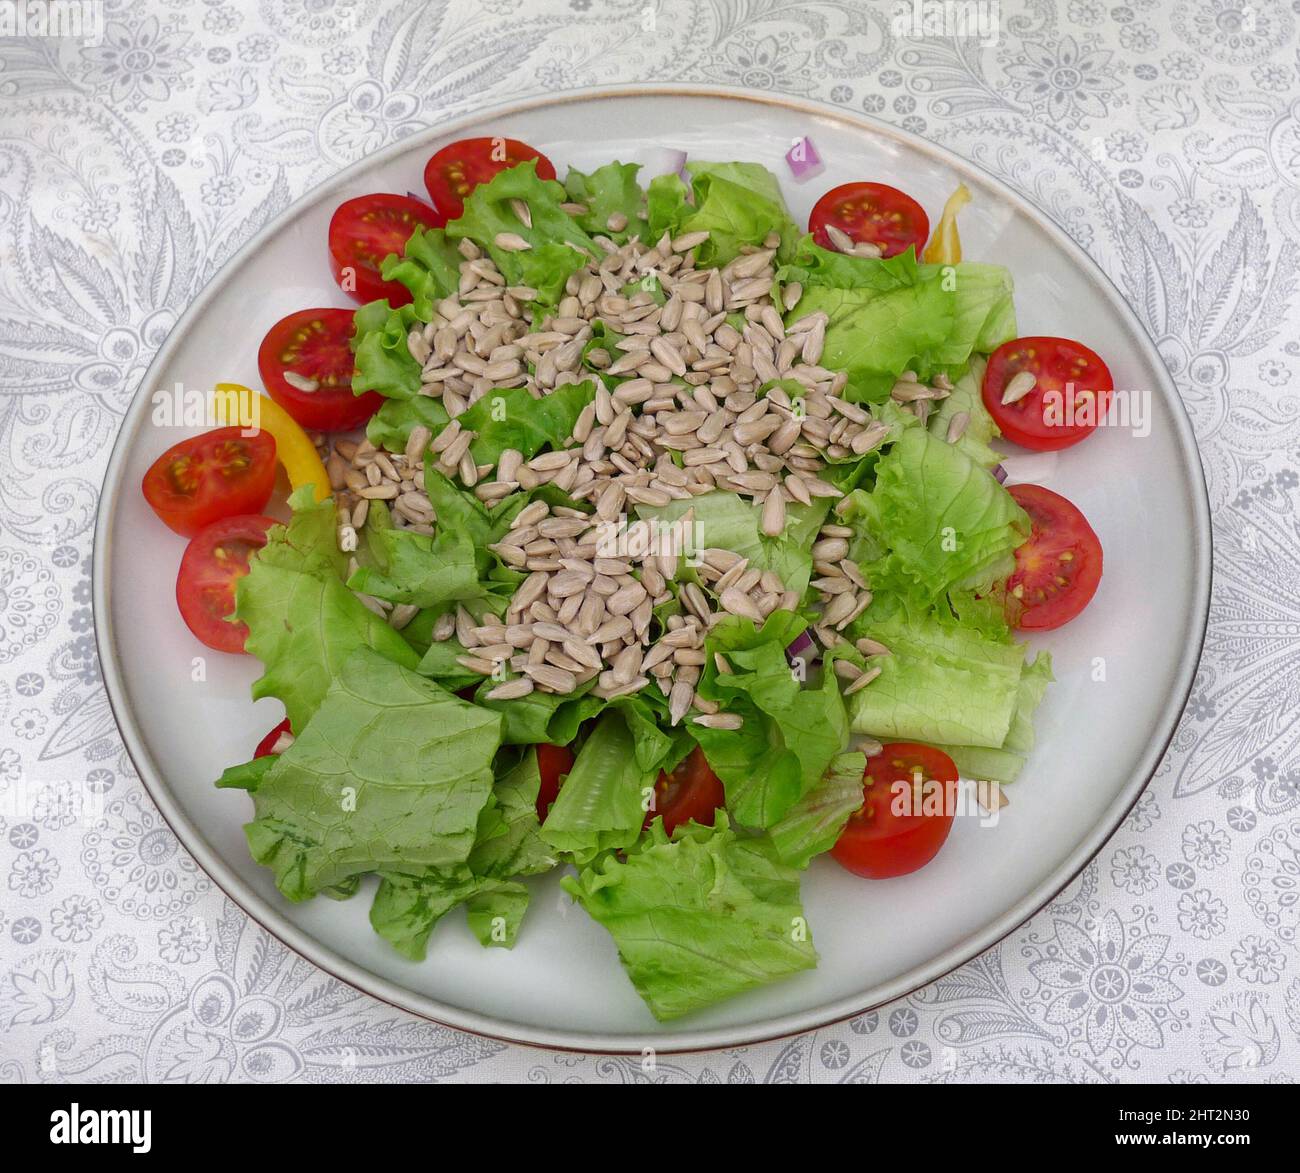 Green salad with sunflower seeds Stock Photo